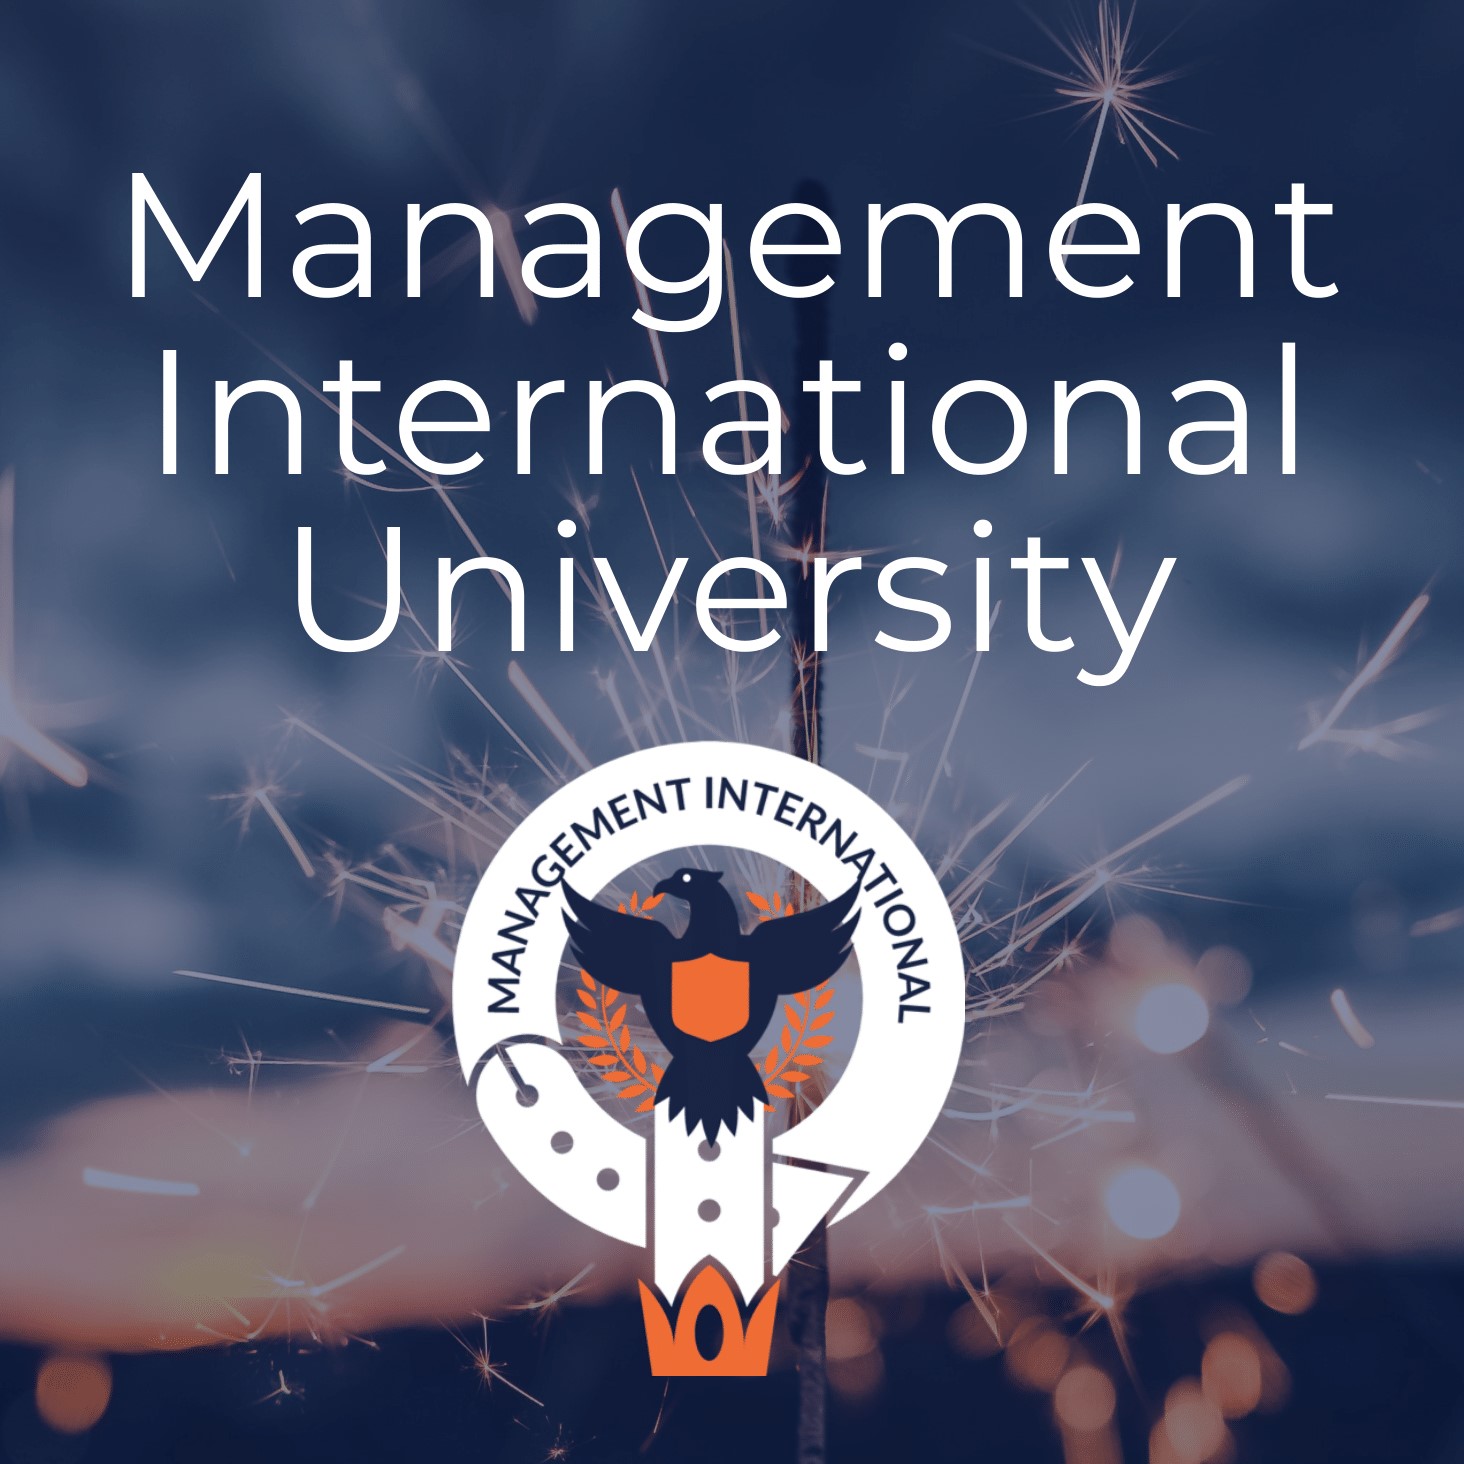 apply-to-study-at-the-management-international-university-in-london-uk-2